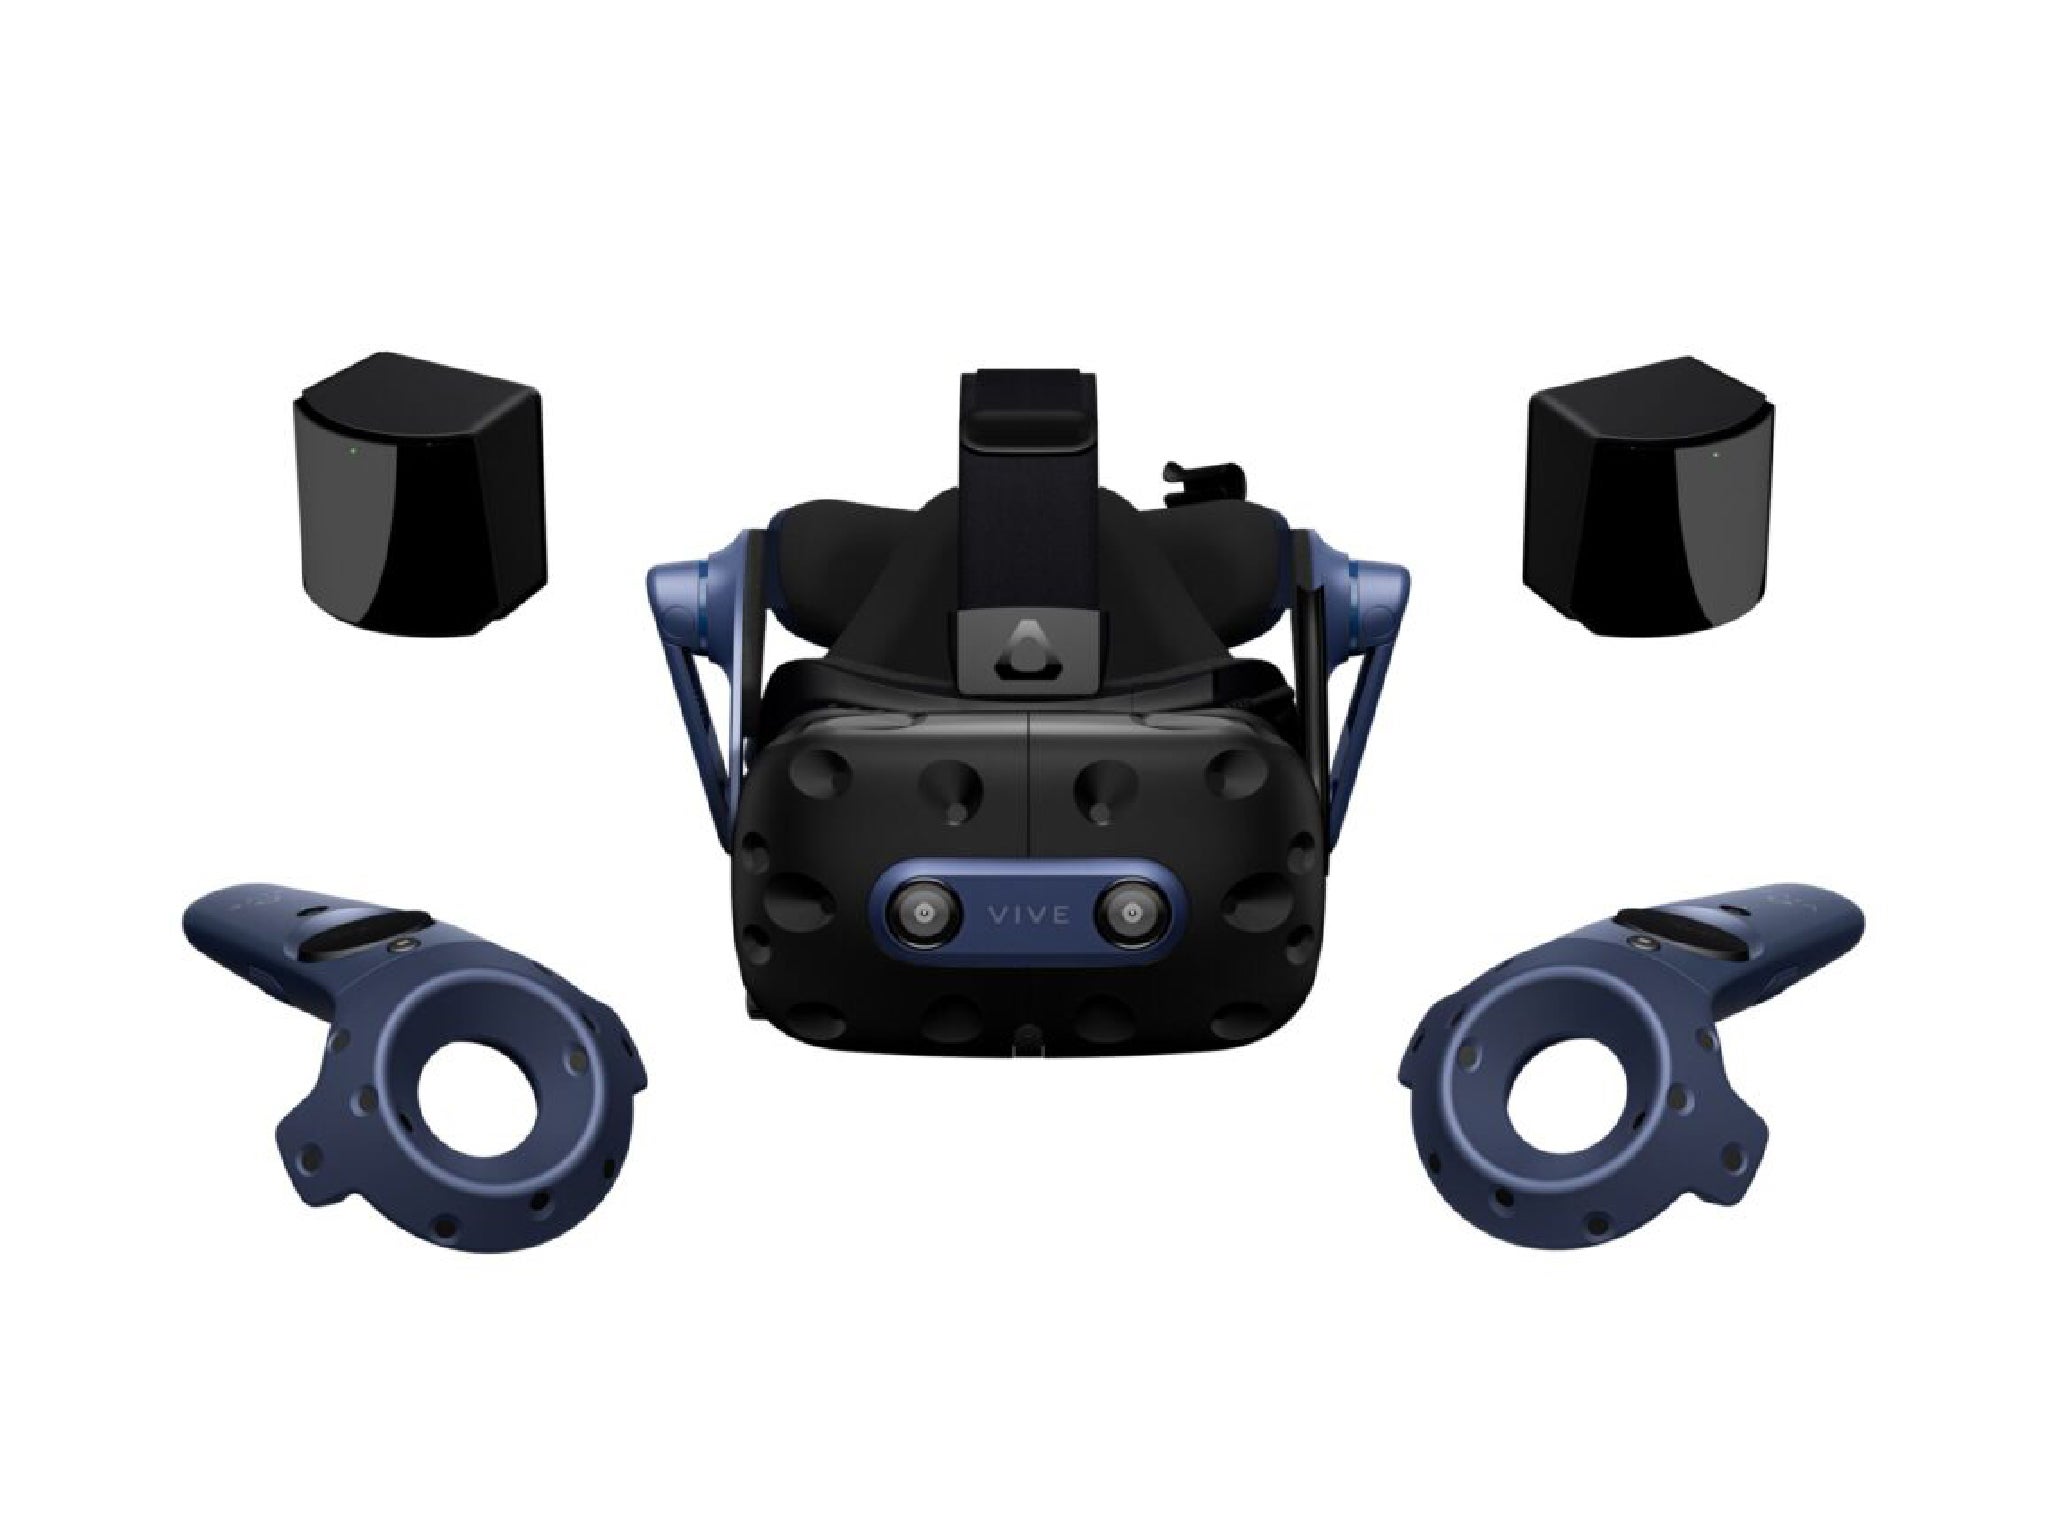 HTC Vive Pro 2 with base stations and controllers